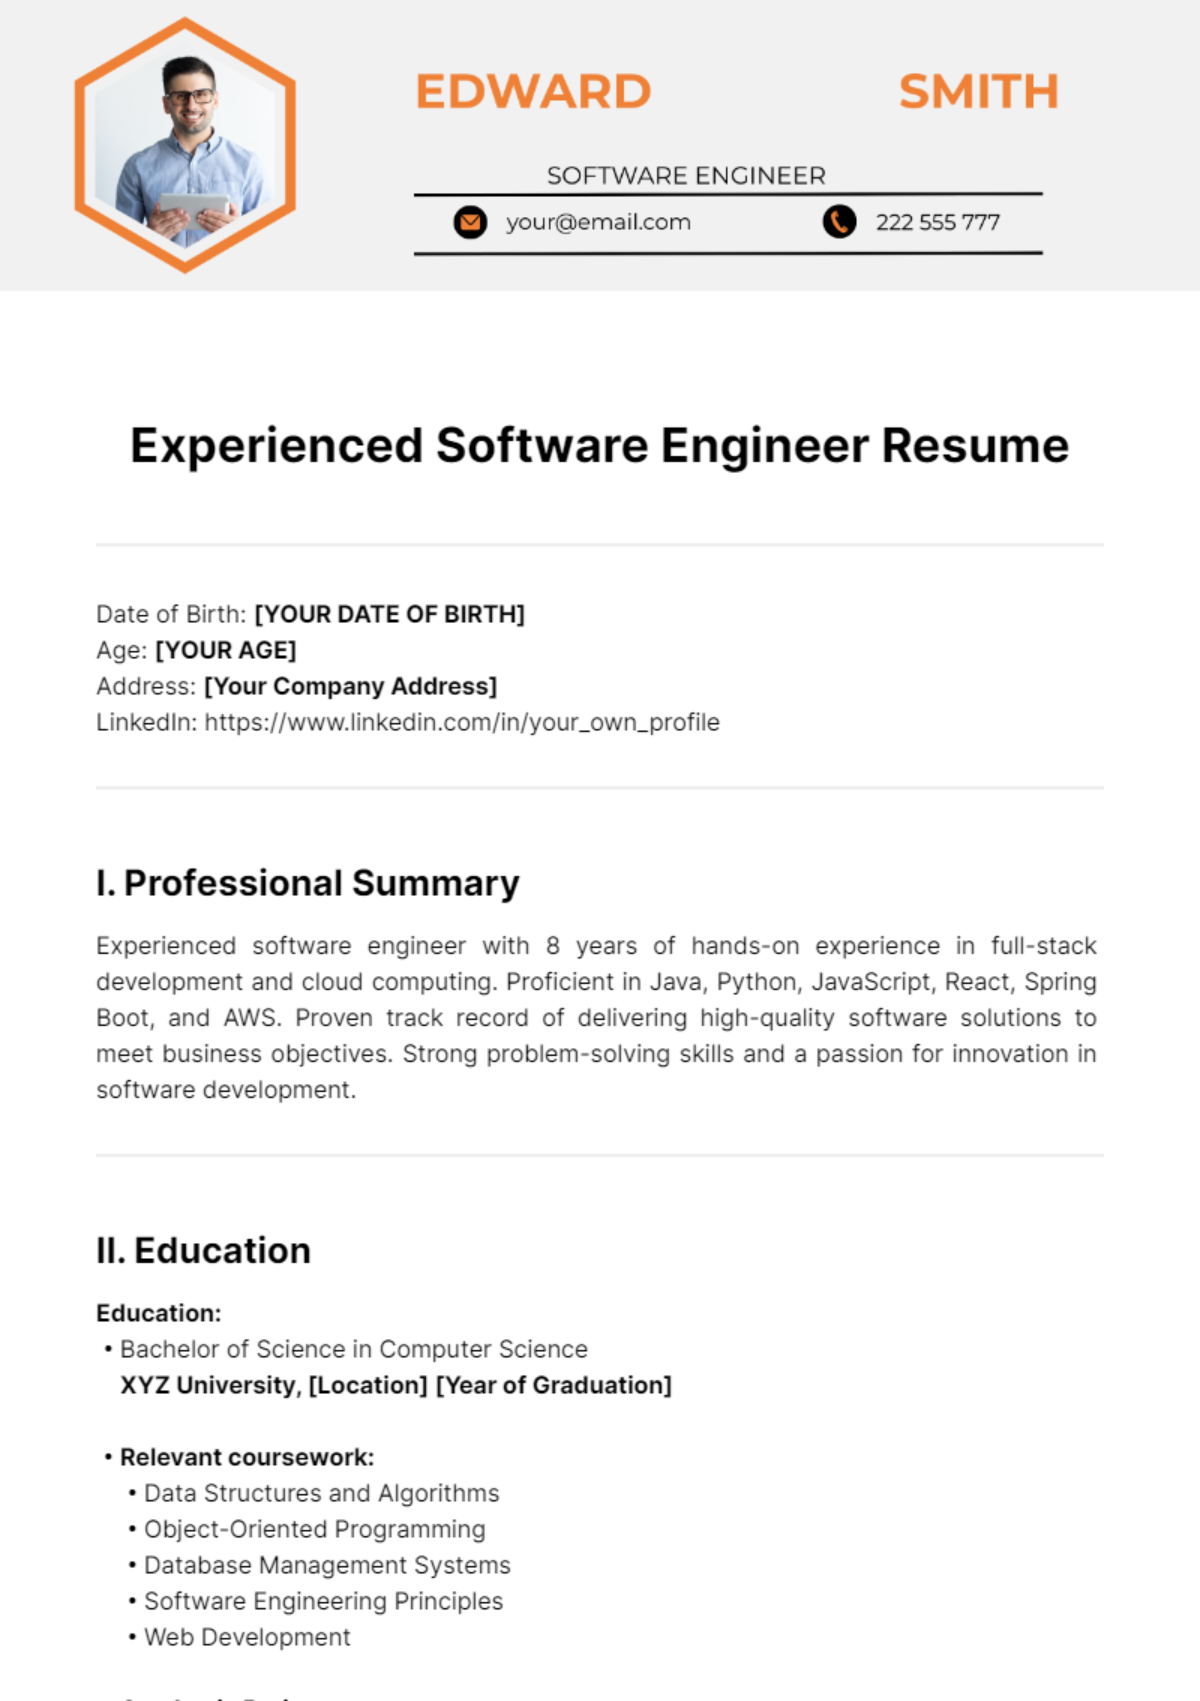 Experienced Software Engineer Resume Template